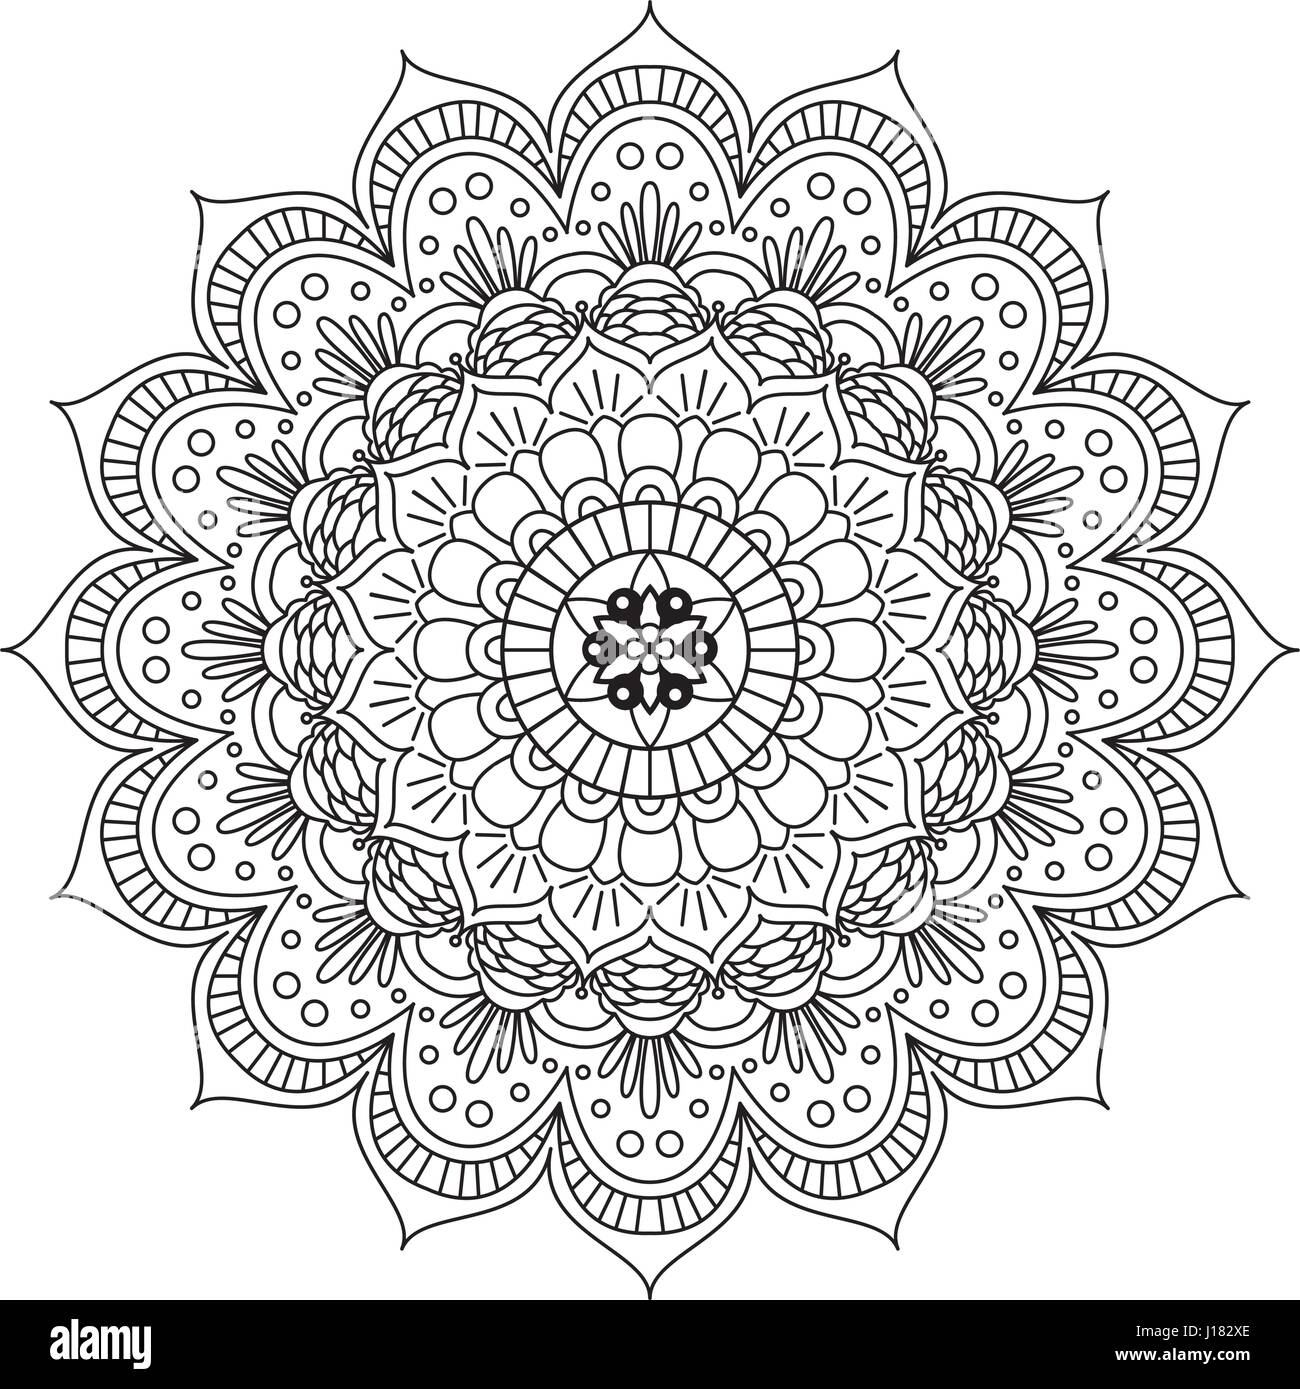 Coloring Book Mandala. Circle lace ornament, round ornamental mandala pattern, black and white design. vector for coloring page Stock Vector